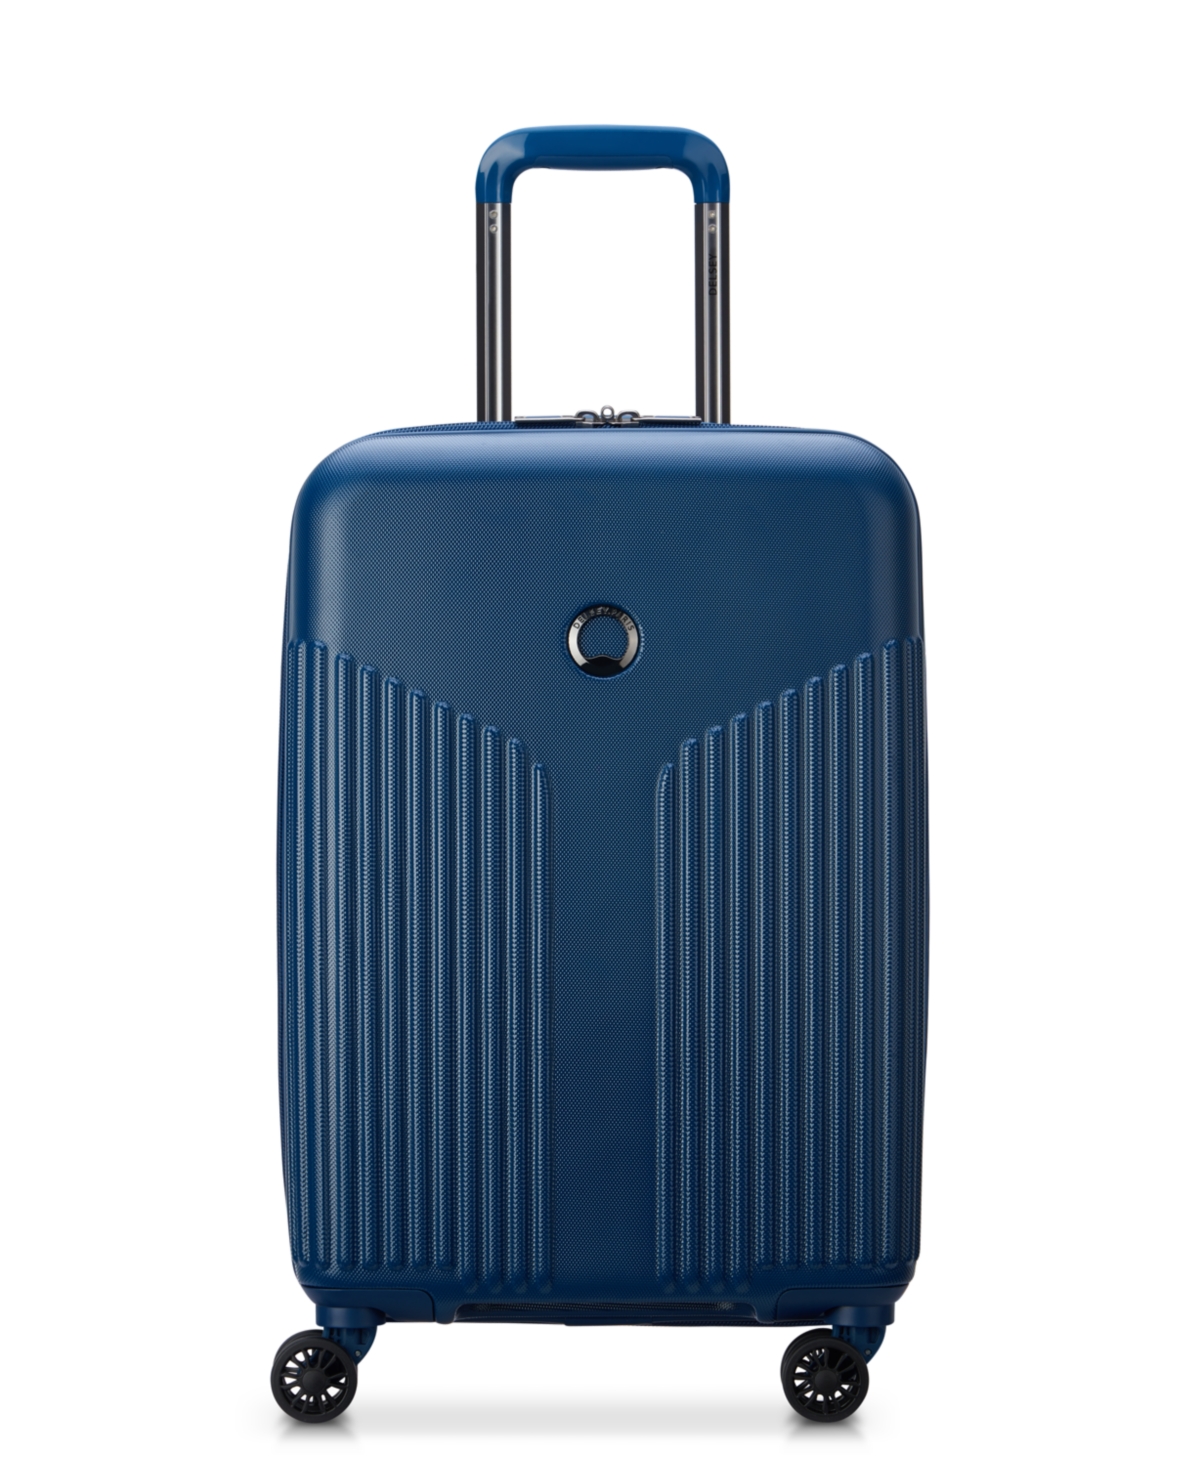 Comete 3.0 20" Expandable Spinner Carry-On Luggage - Lavendar